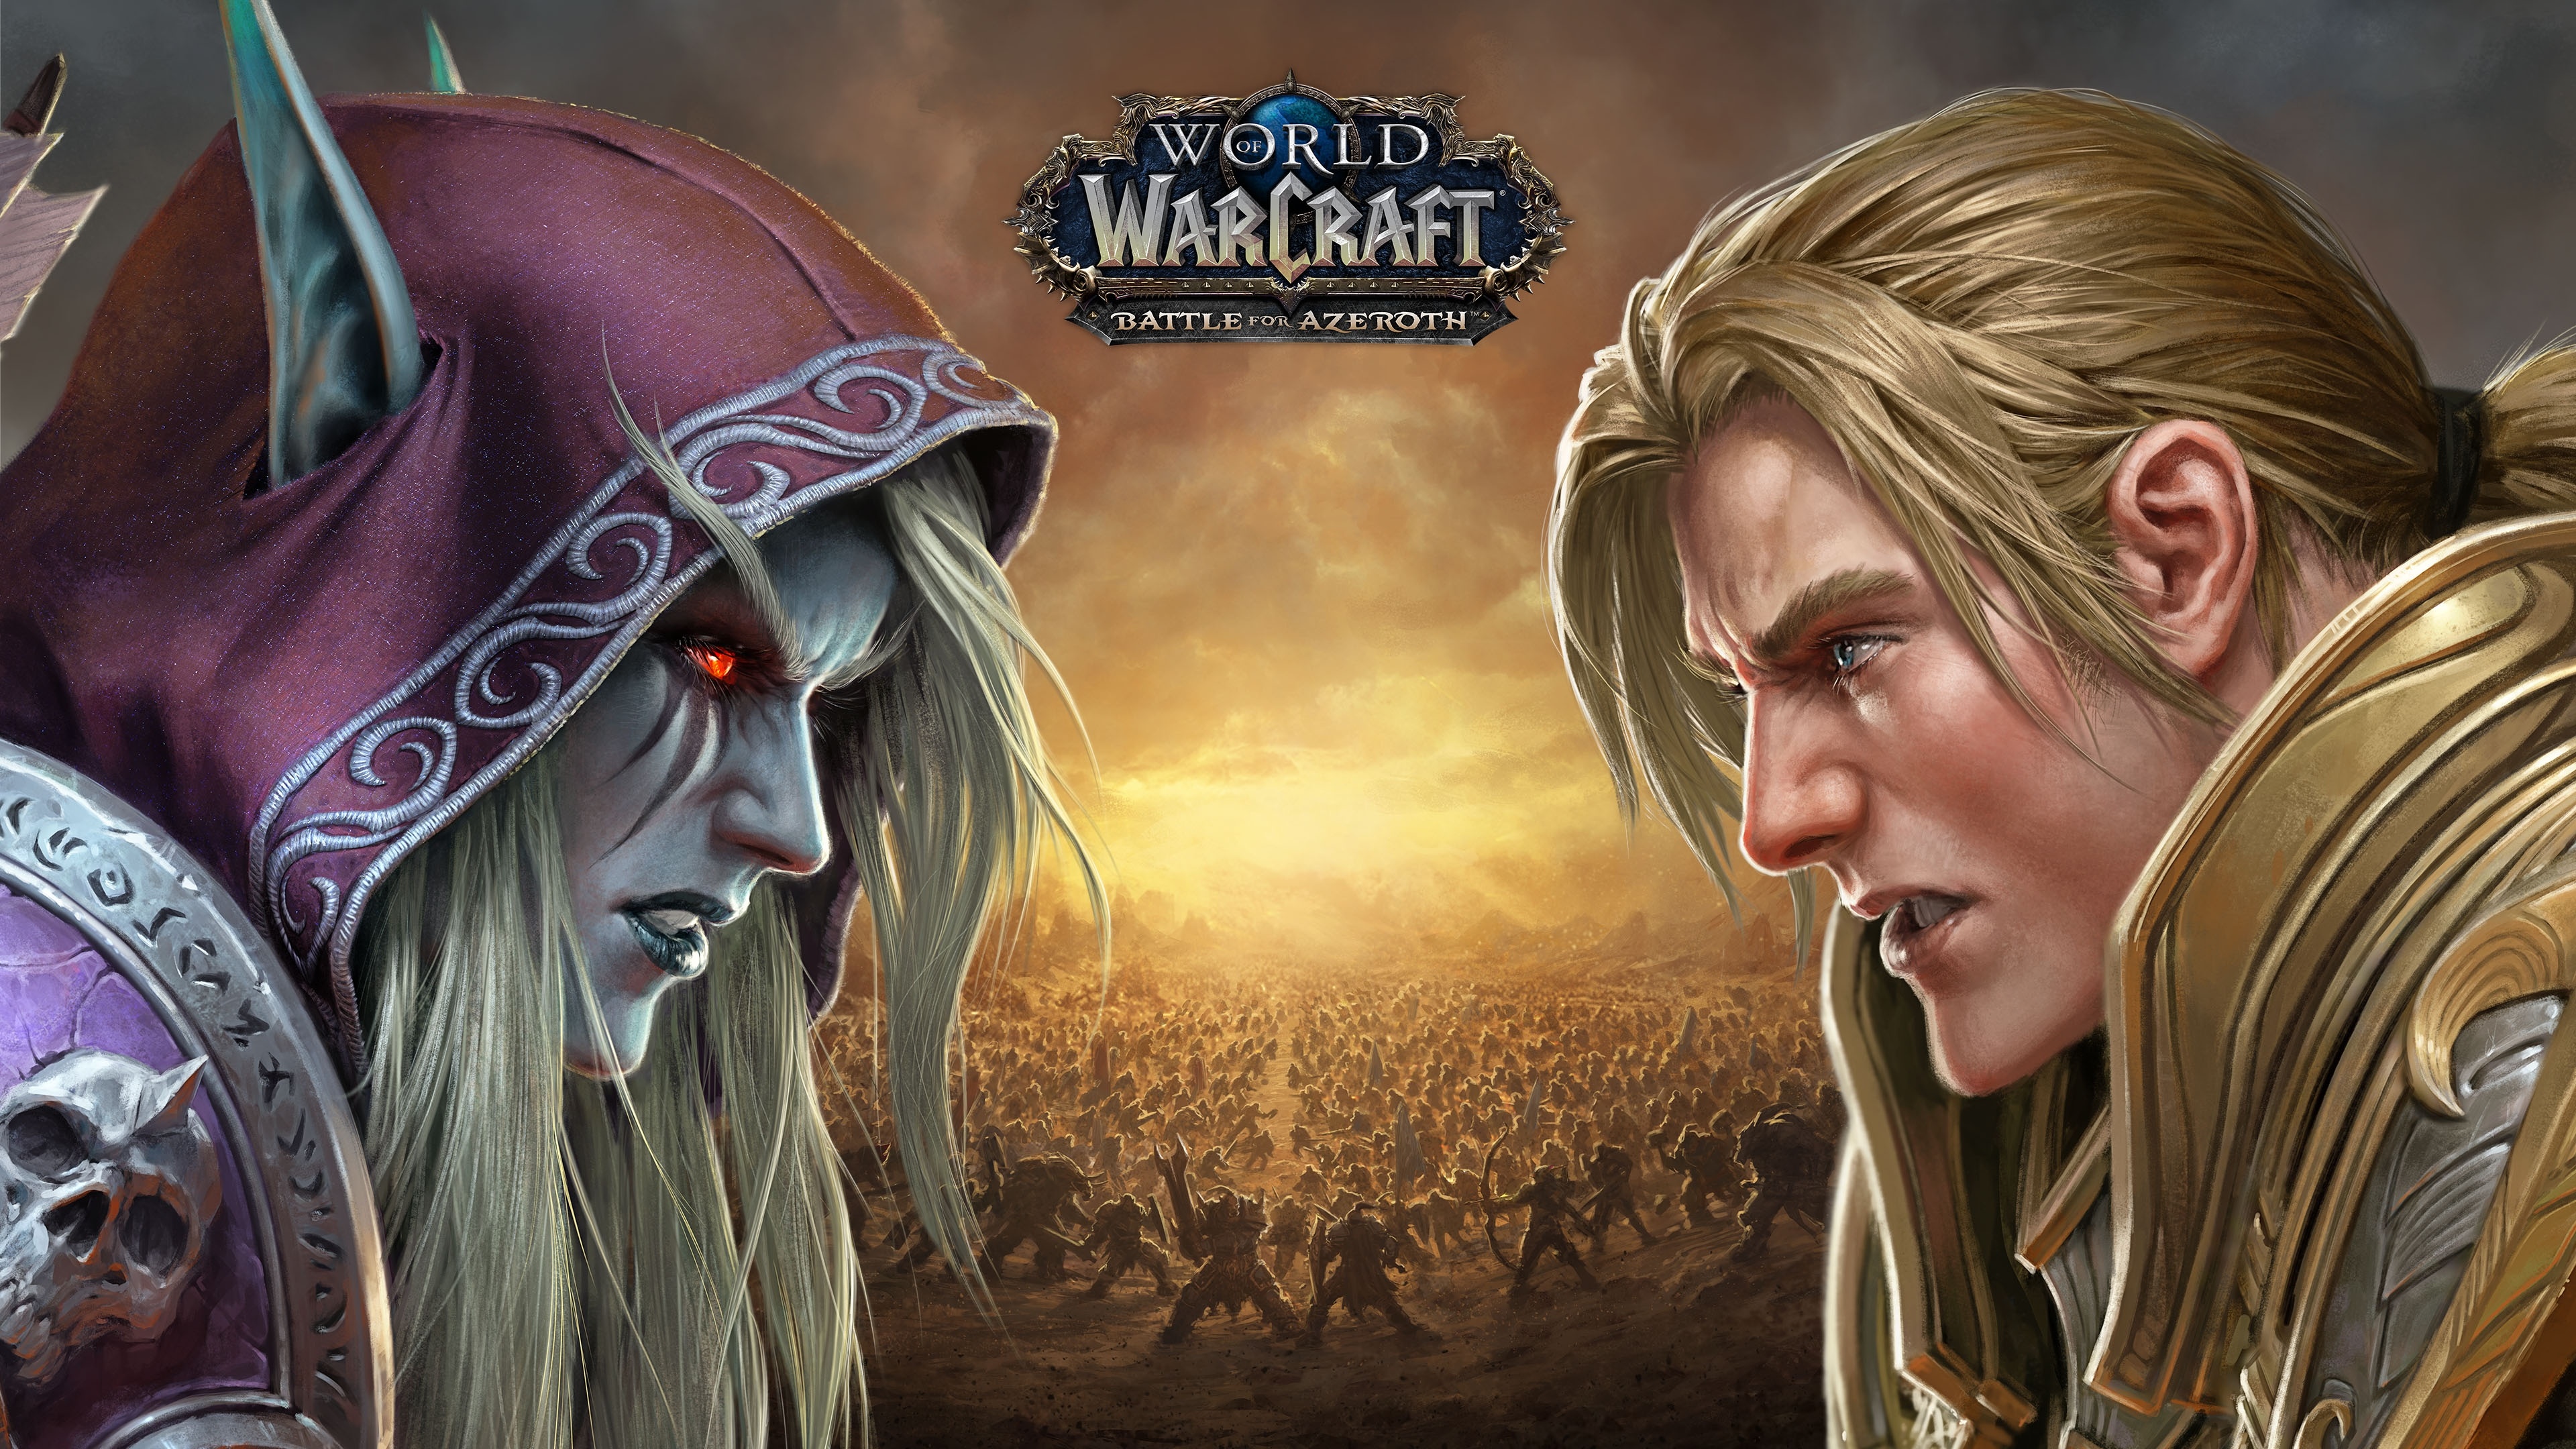 “World of Warcraft: Battle for Azeroth” Receives Release Date - Seventh Expansion Hitting Shelves Aug. 14